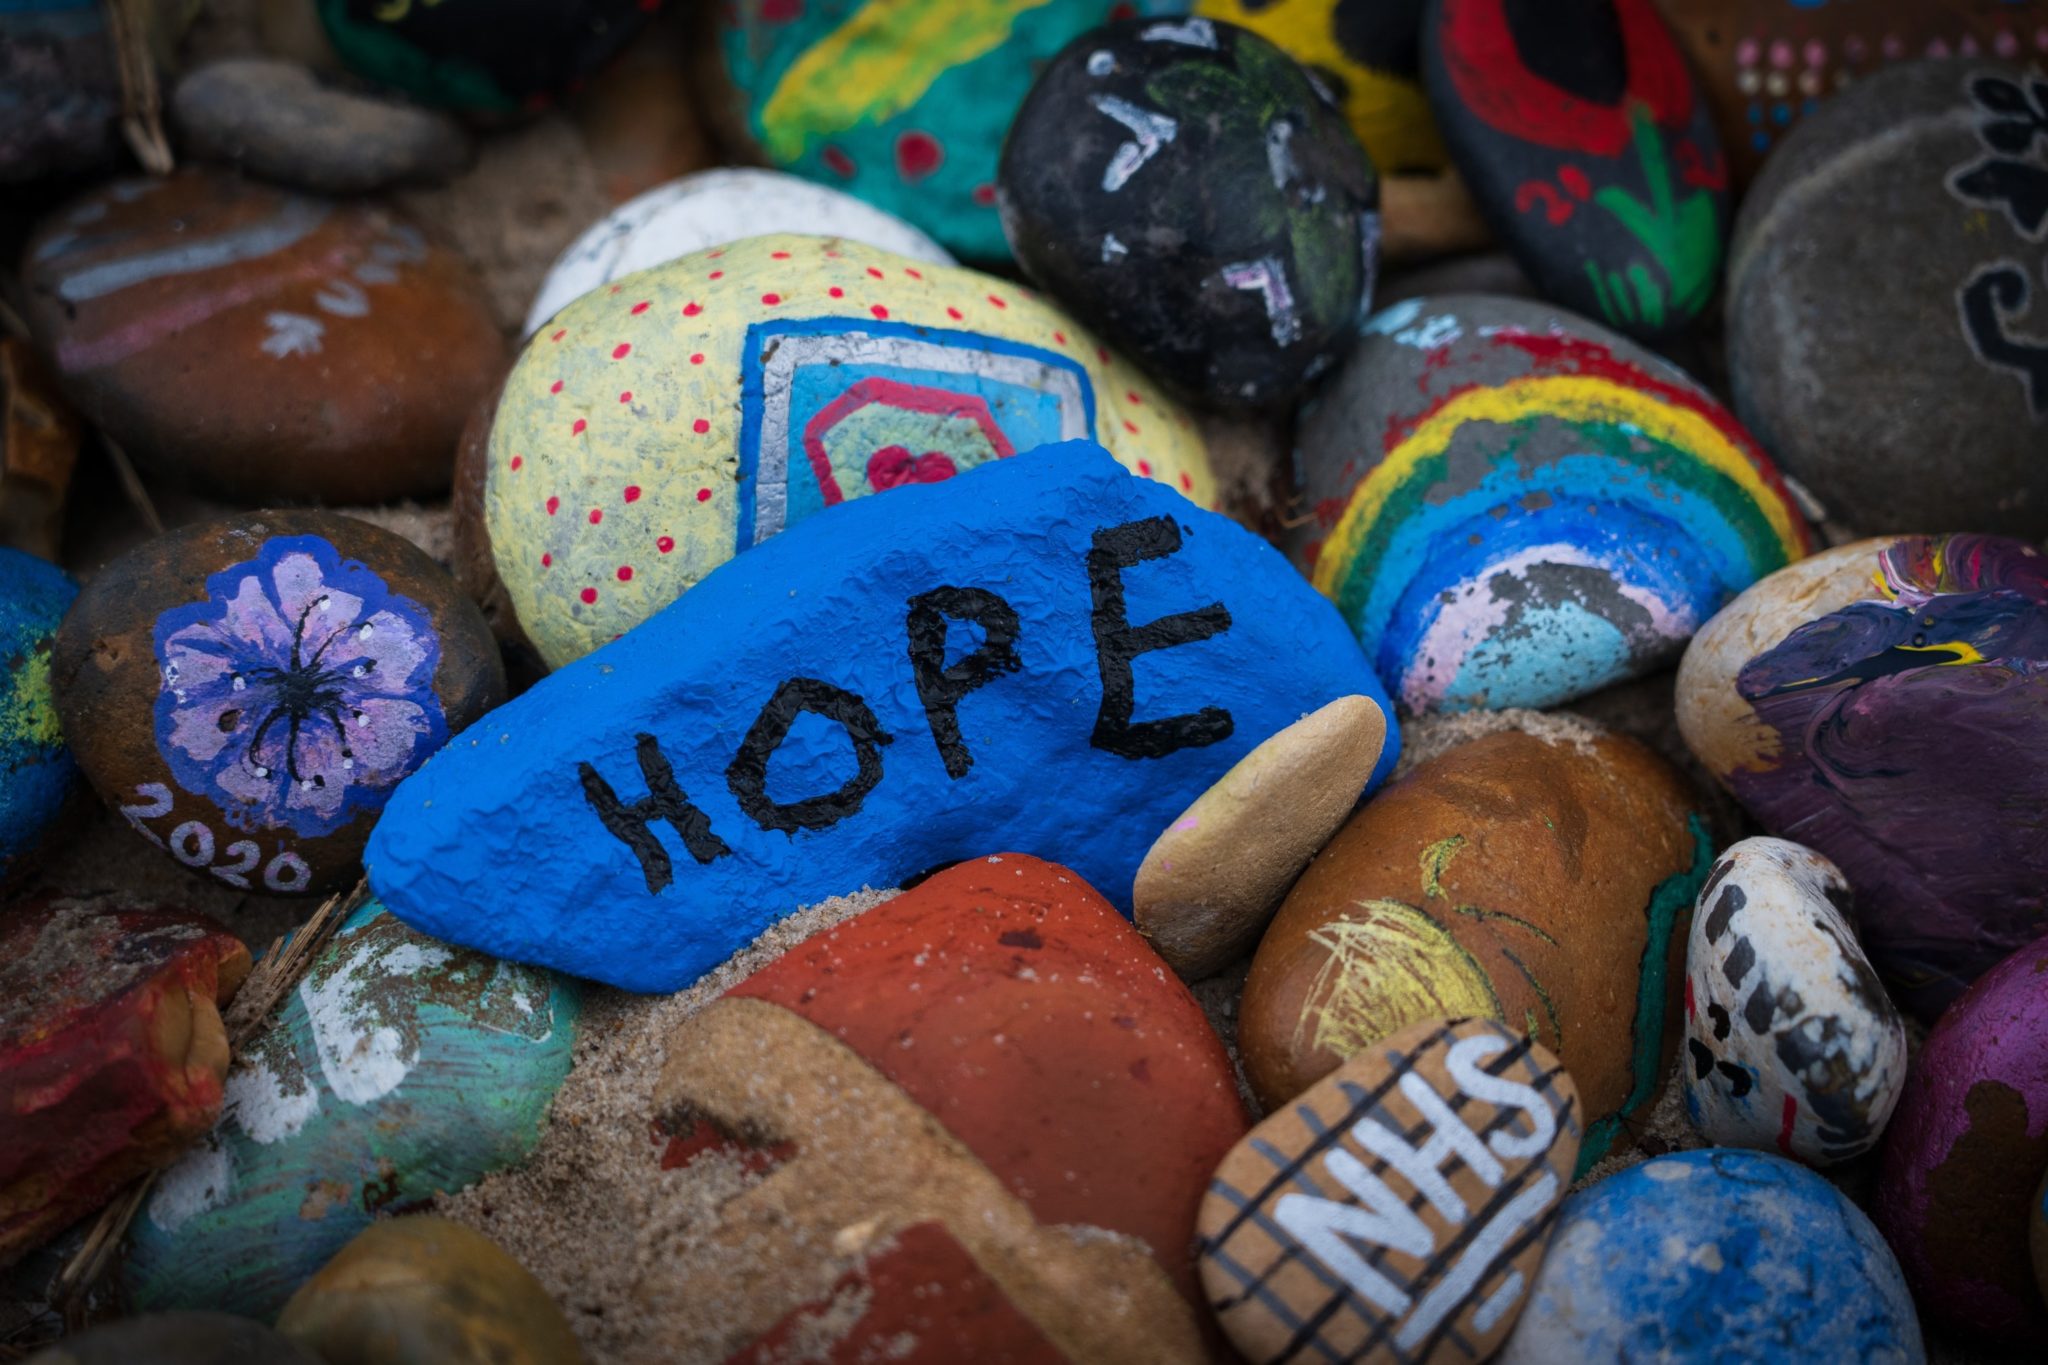 rocks painted with the word hope